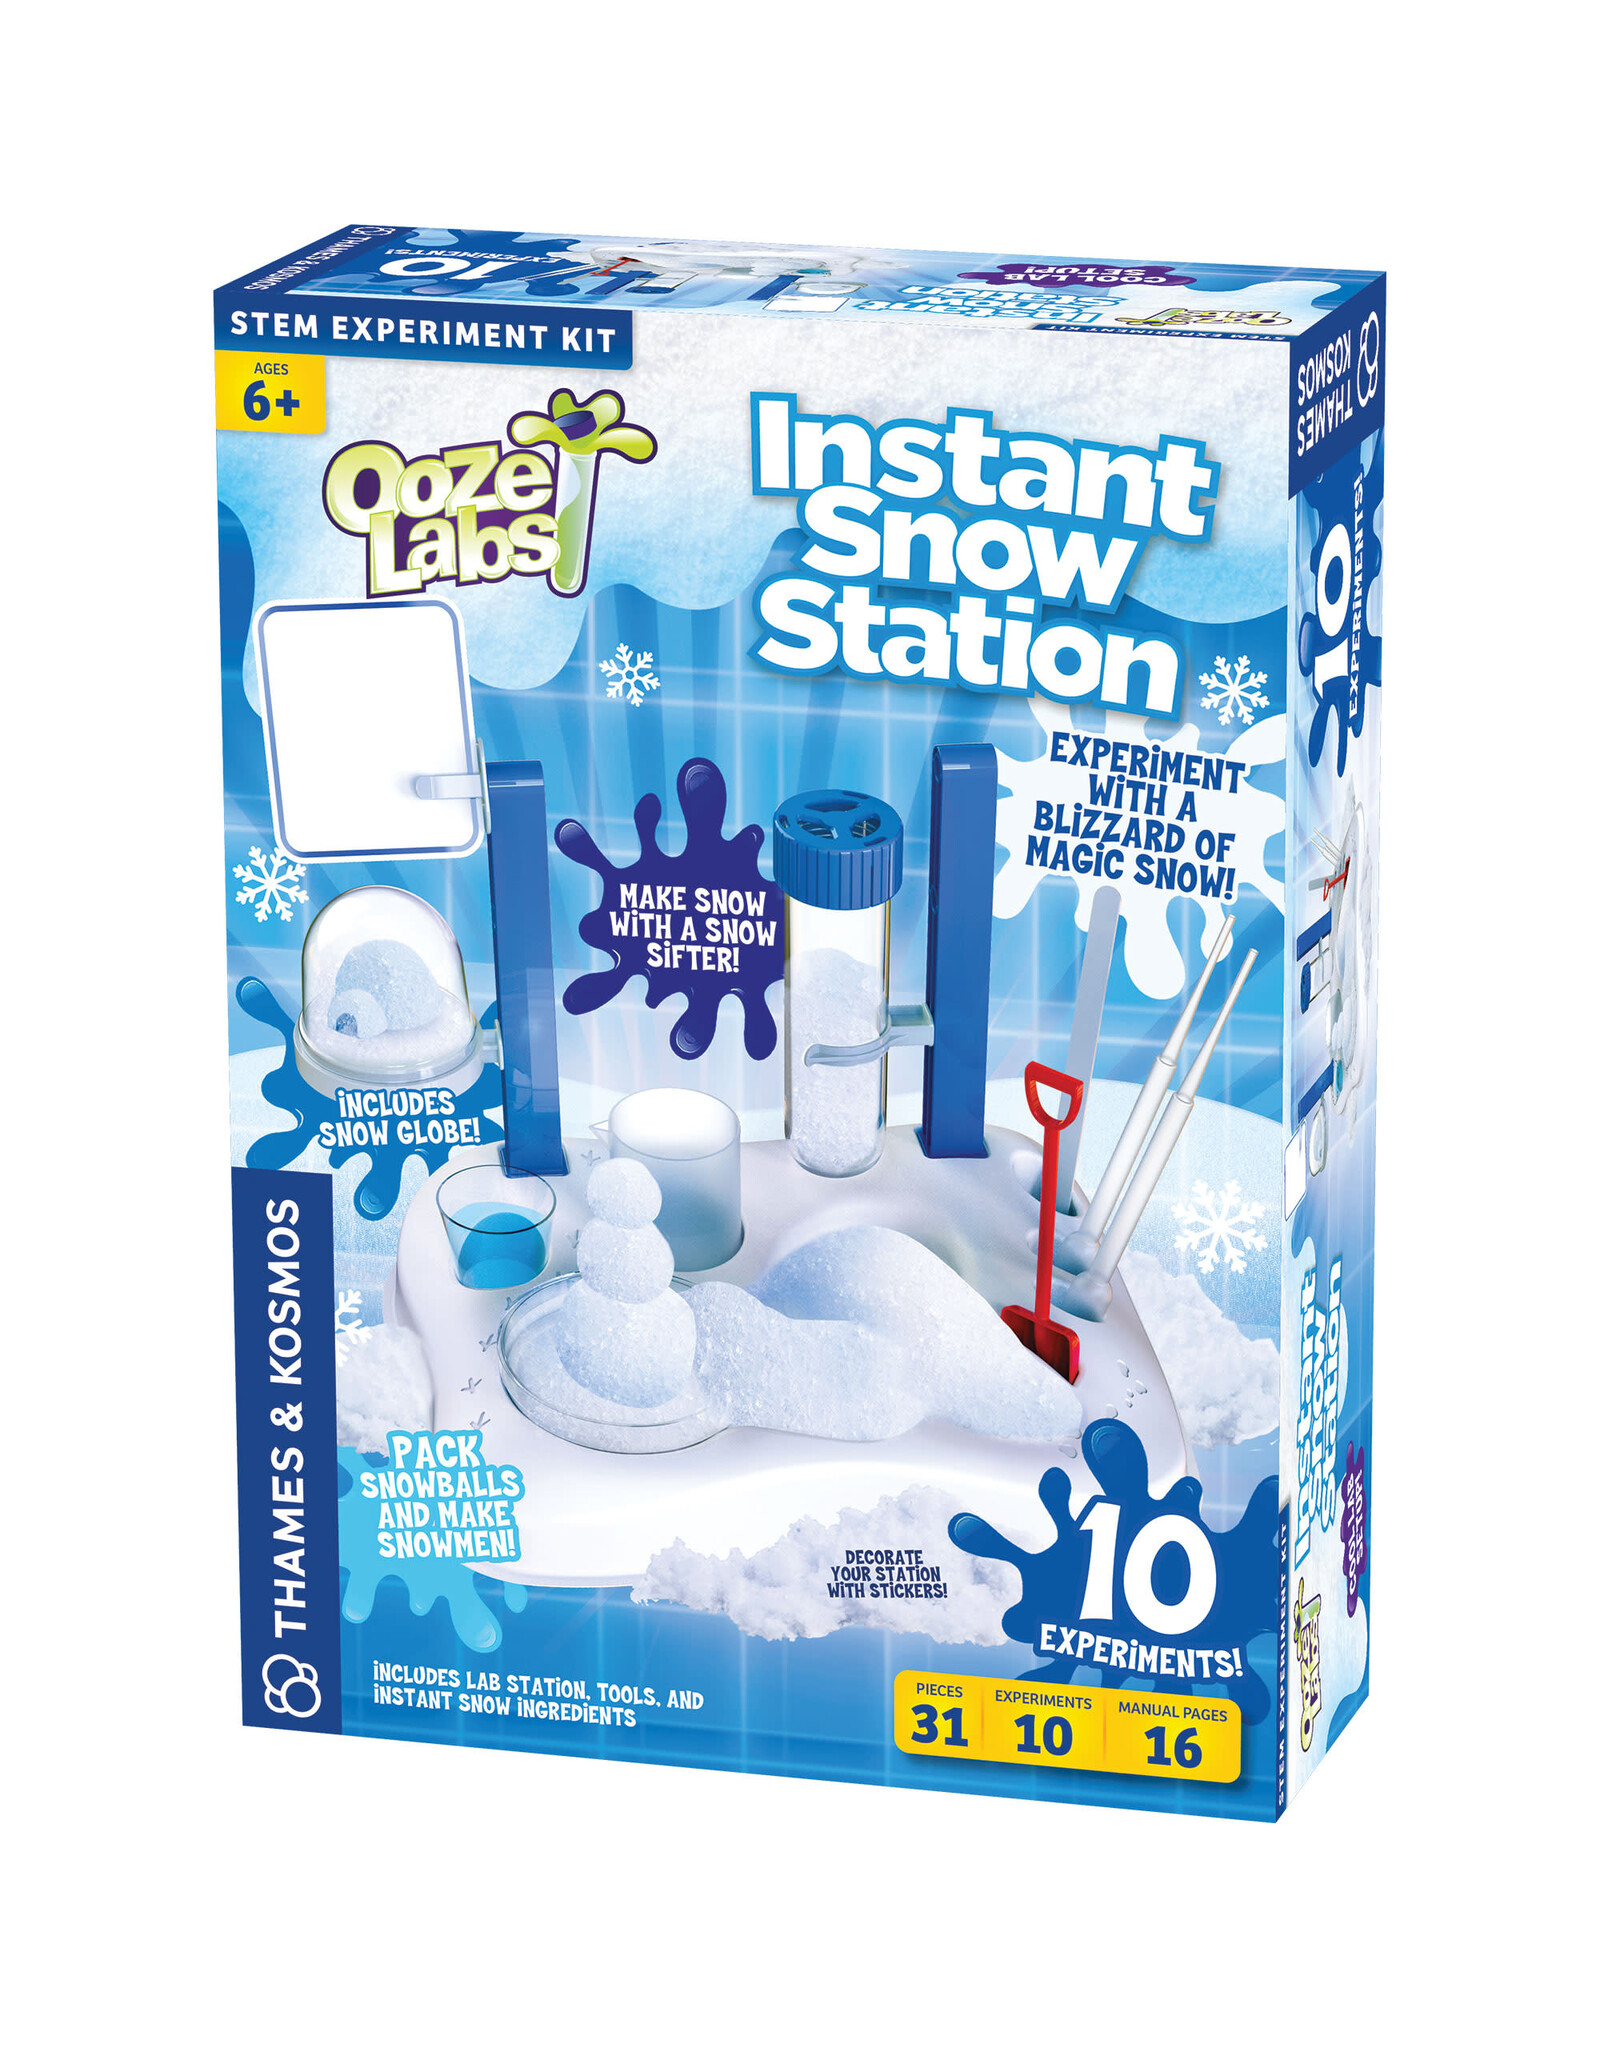 Ooze Labs: Instant Snow Station